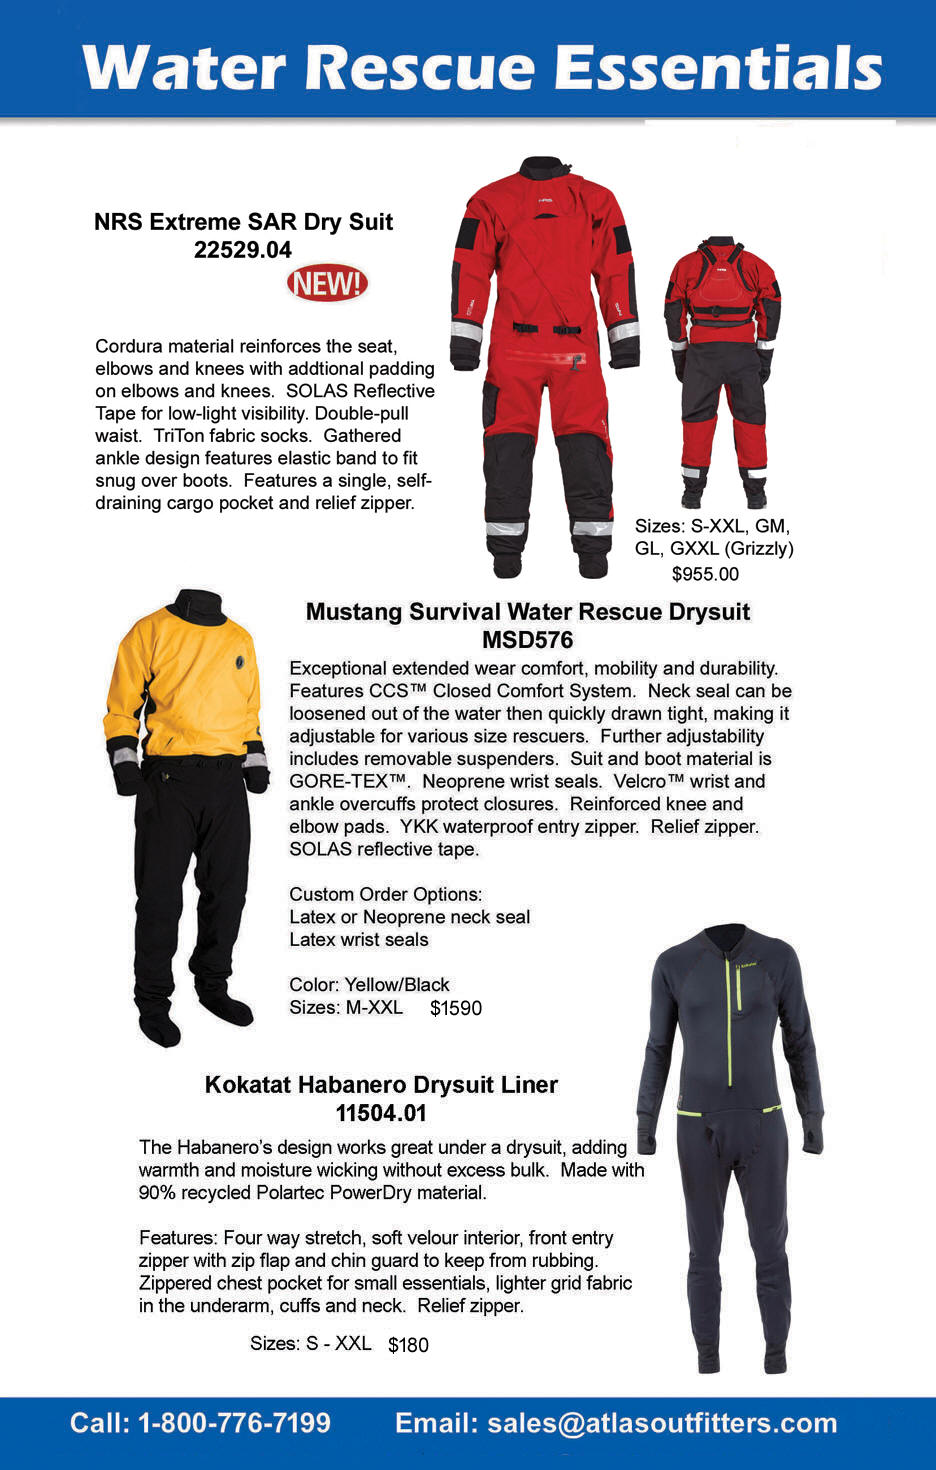 Swiftwater drysuits and liner, Mustang Survival, NRS, Kokatat